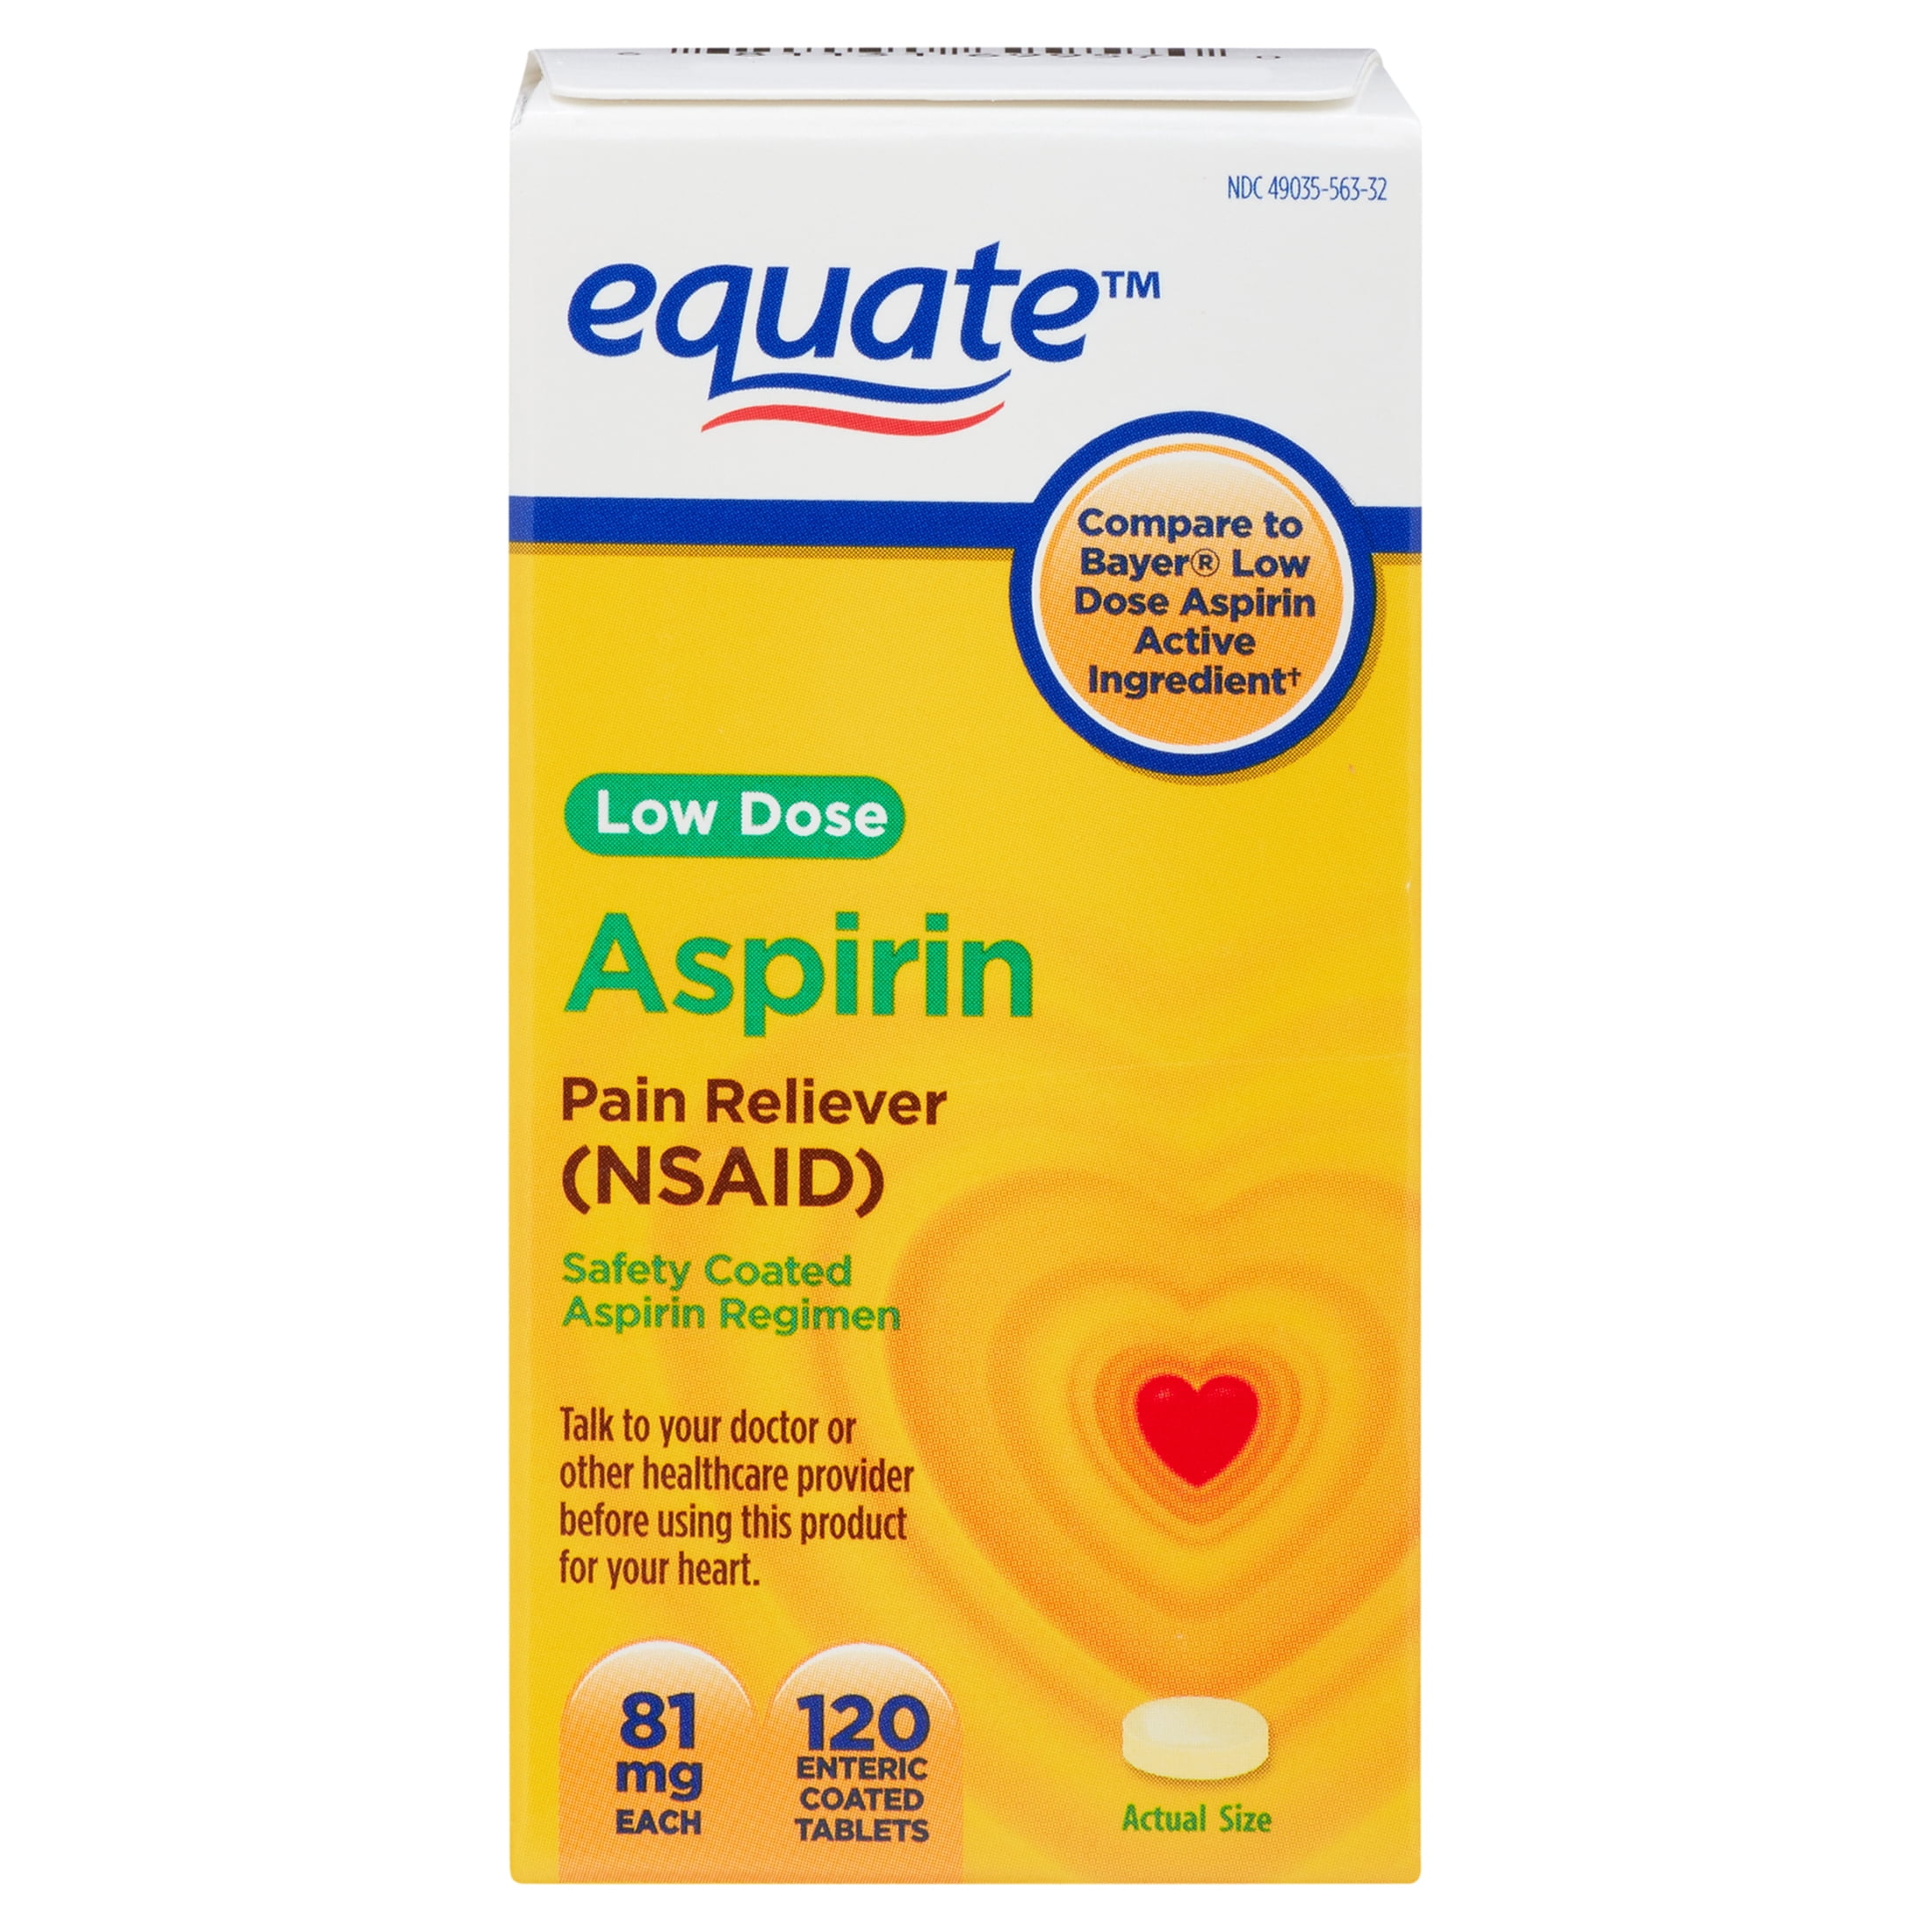 Equate Adult Low Dose Aspirin Safety Coated Tablets, 81 mg, 120 Count